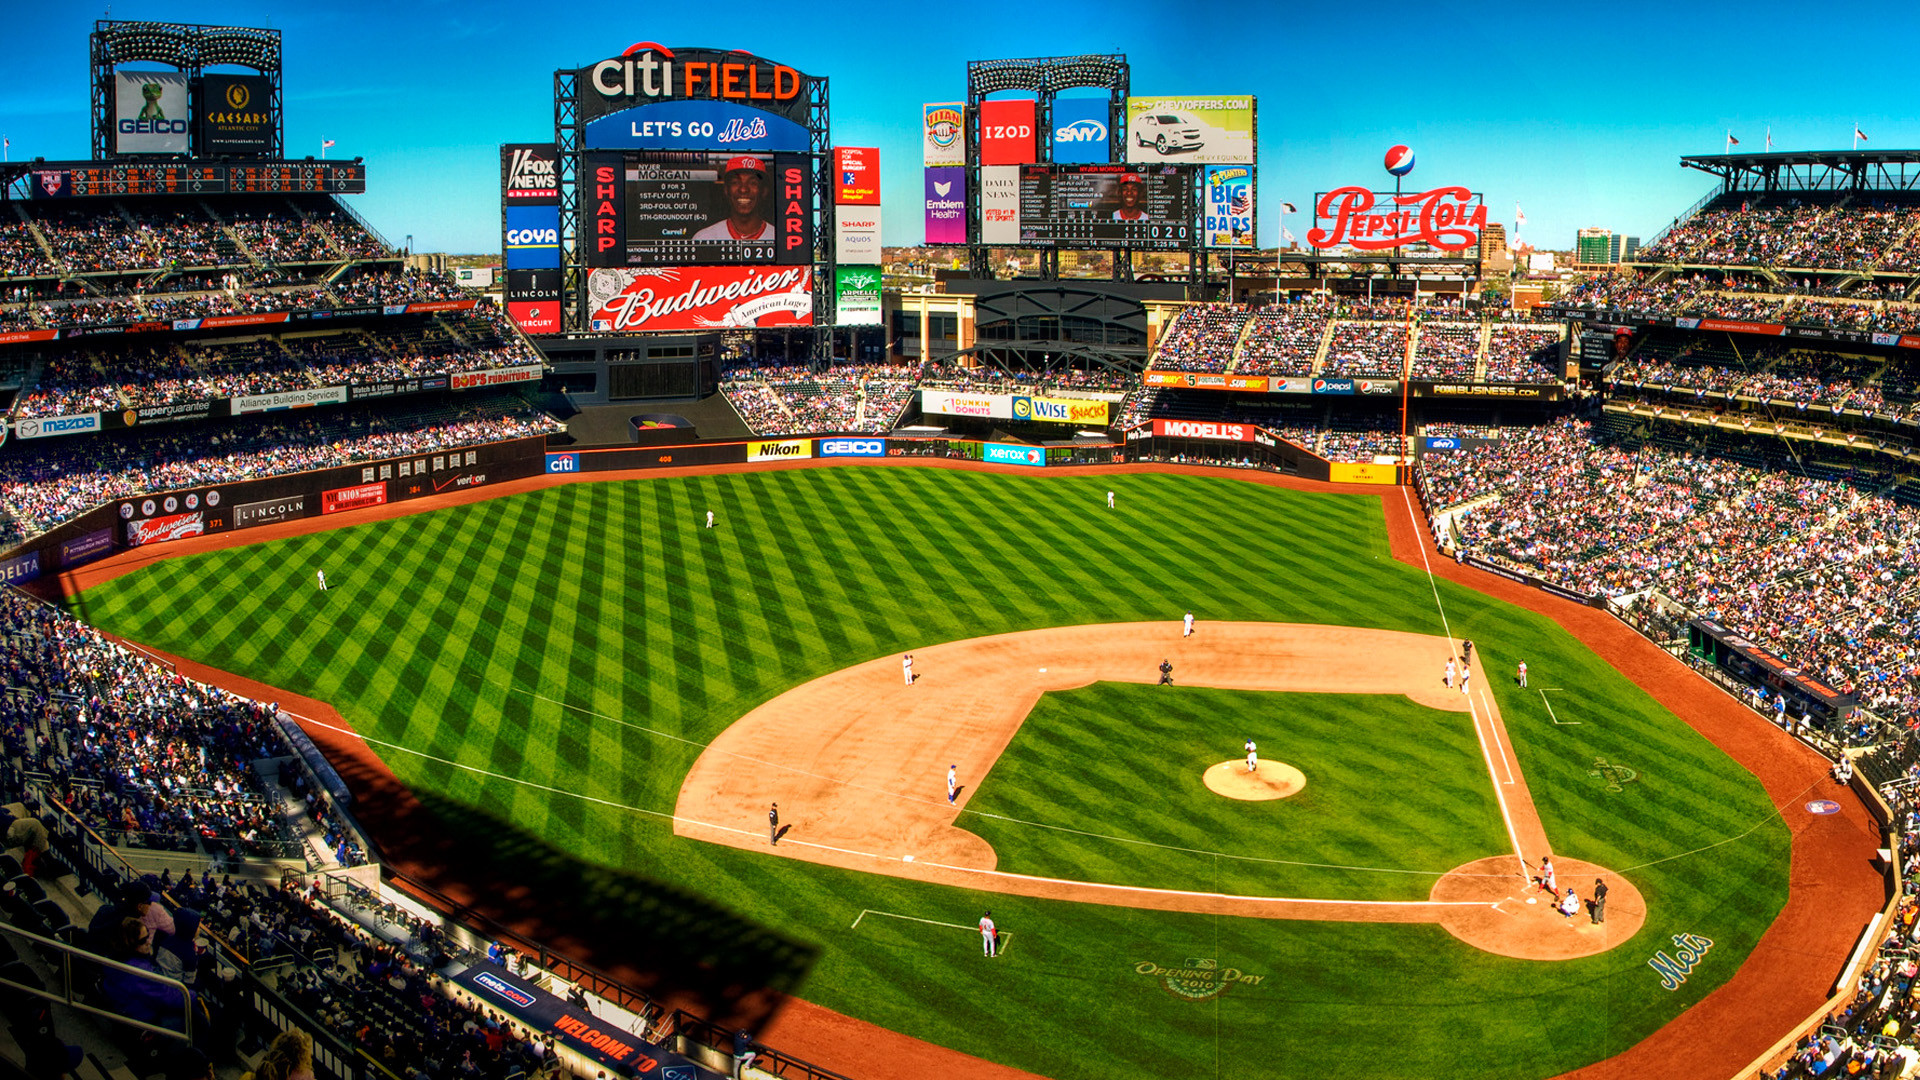 Wallpapers Sports - Leisures > Wallpapers Baseball New York Mets by  djsilver - Hebus.com